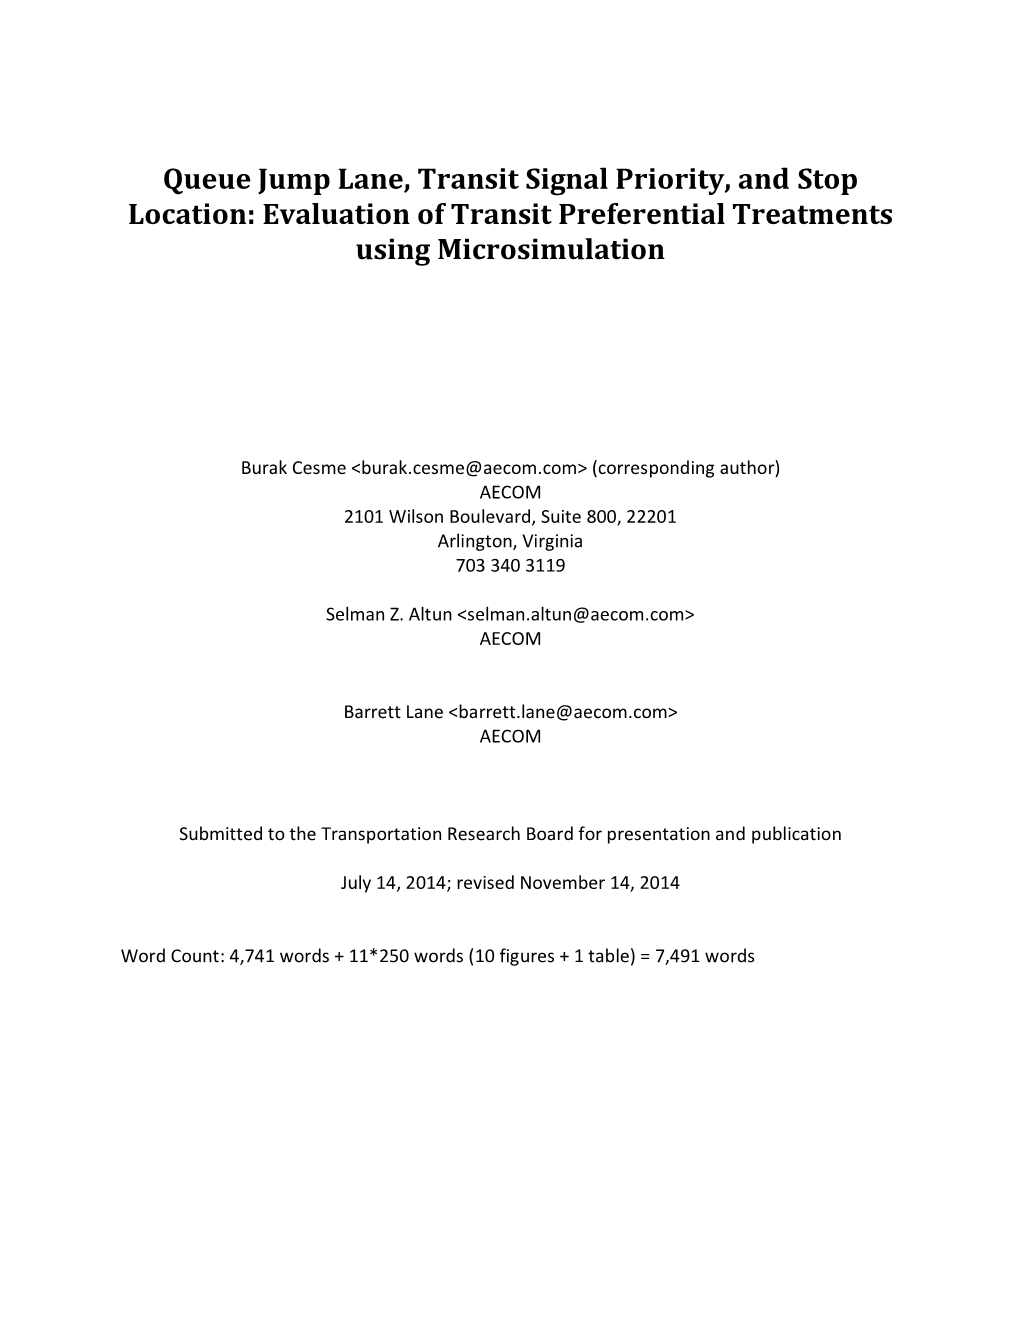 Queue Jump Lane, Transit Signal Priority, and Stop Location: Evaluation of Transit Preferential Treatments Using Microsimulation